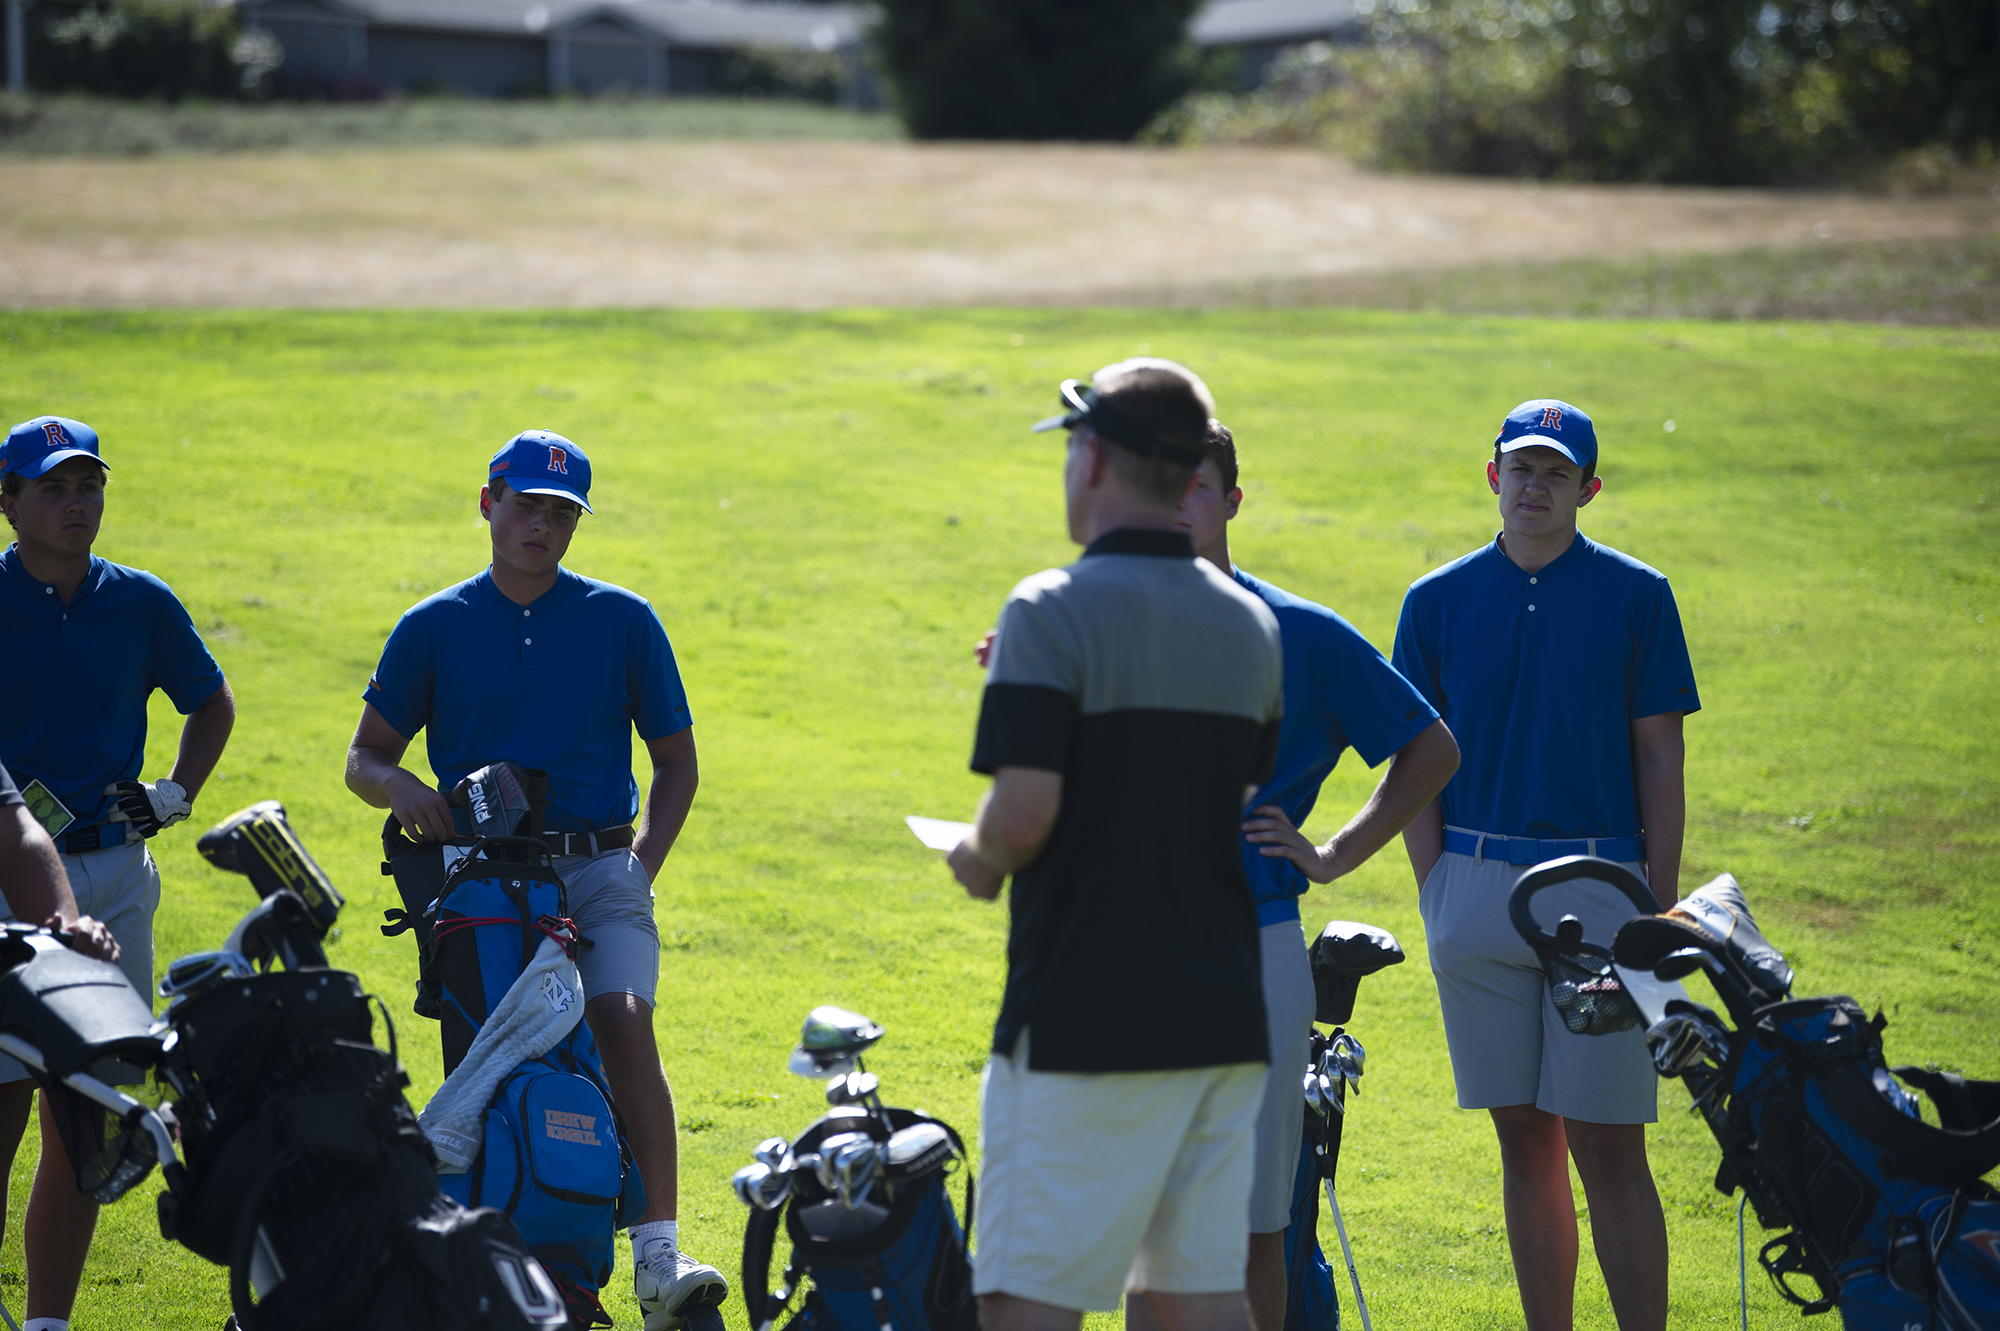 Ridgefield golfers look on as Union coach Gary Mills gives instructions before the high school boys golf match between Ridgefield and Union at Camas Meadows Golf Course on Monday, Aug. 29, 2022.